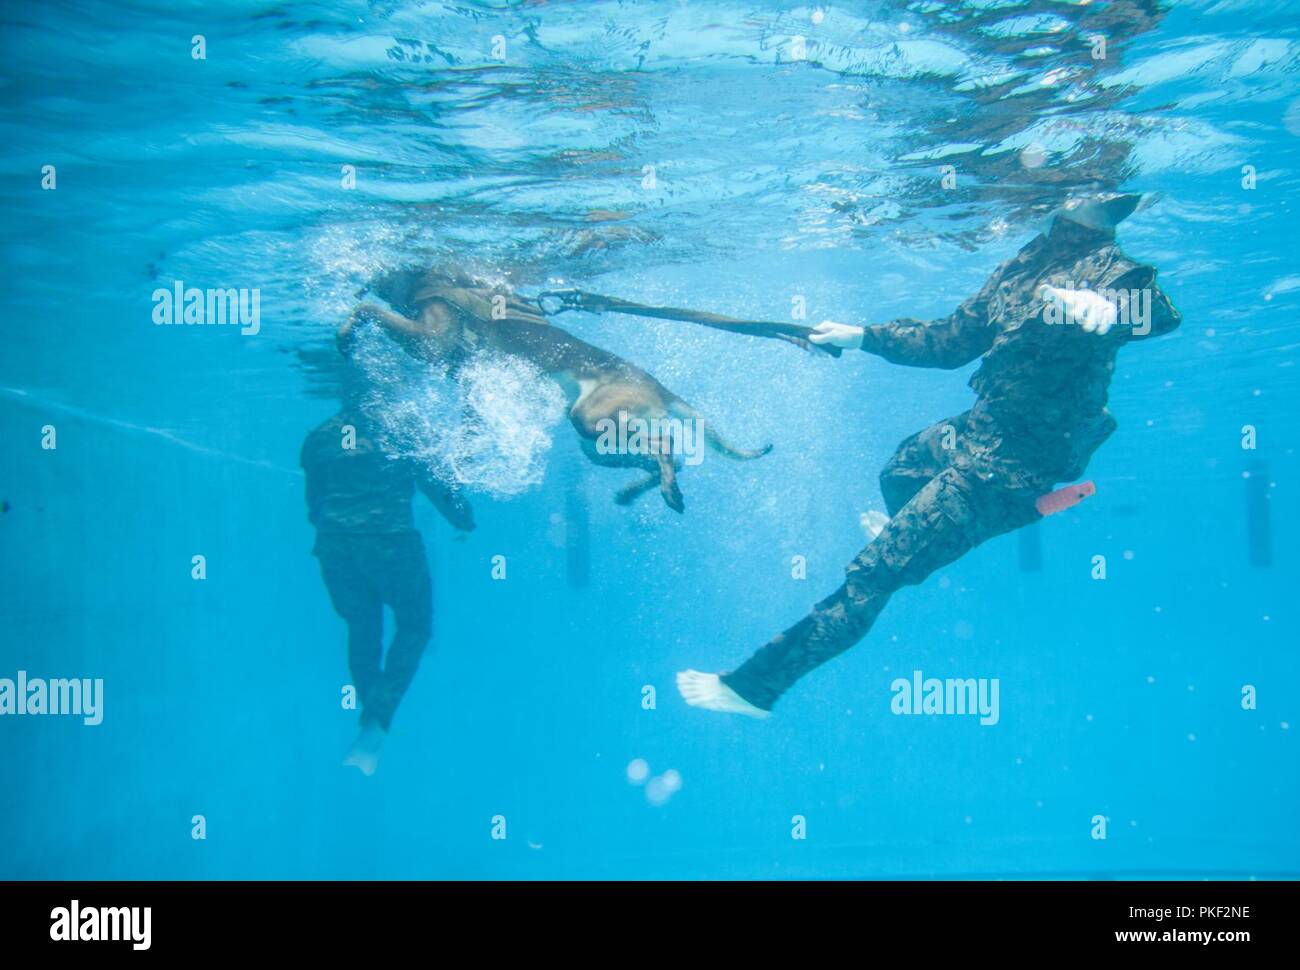 A U.S. Marine 2nd Law Enforcement Battalion military working dog-handler, introduces his dog to swimming, in the Area 5 pool at Marine Corps Base Camp Lejeune, N.C., Aug. 3, 2018. 2nd LEB practiced aggression training as part of specialized training to familiarize their dogs with water. The 2nd LEB military working dogs benefit from this particular type of training due to not being exposed to water tactics during initial training periods and become better accustomed to performing duties in atypical situations. Stock Photo